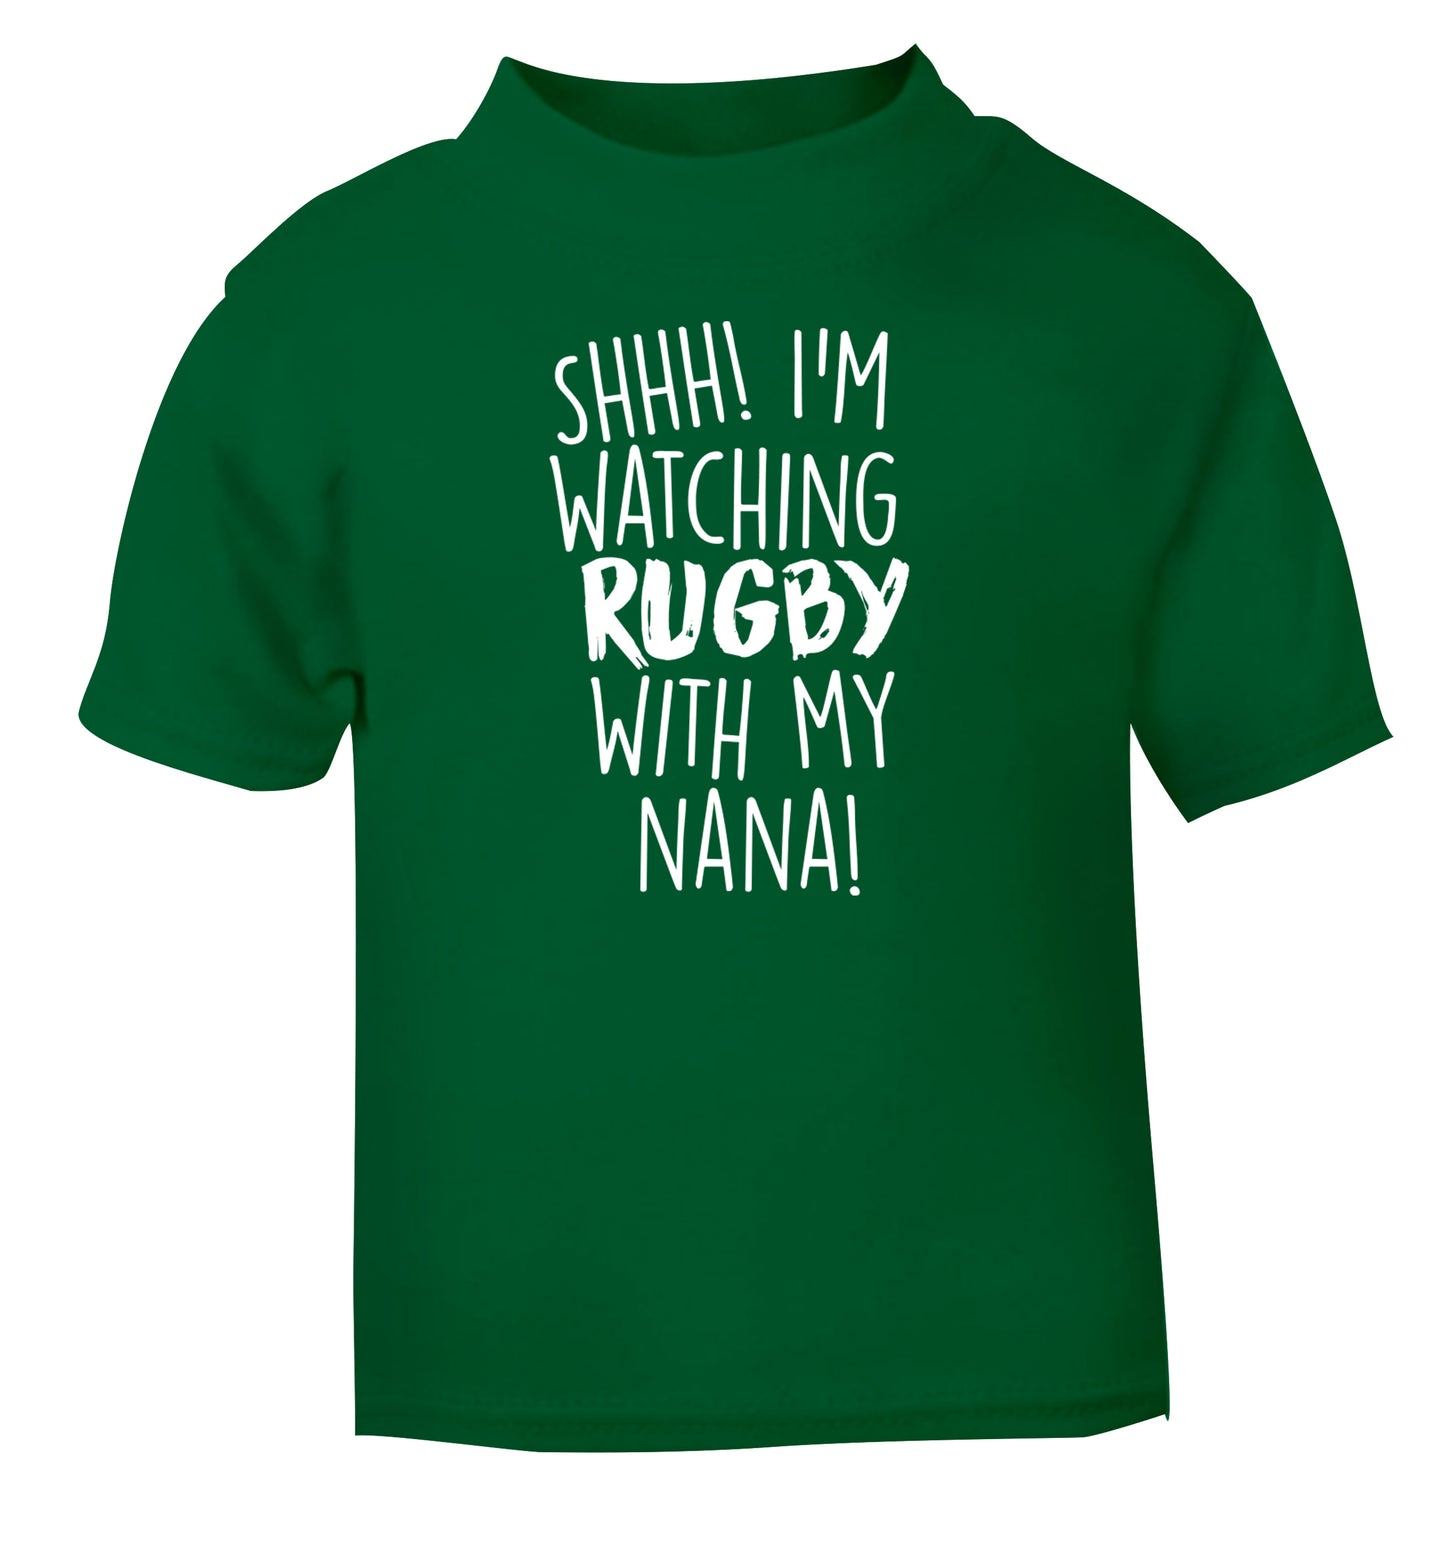 Shh I'm watching rugby with my nana green Baby Toddler Tshirt 2 Years